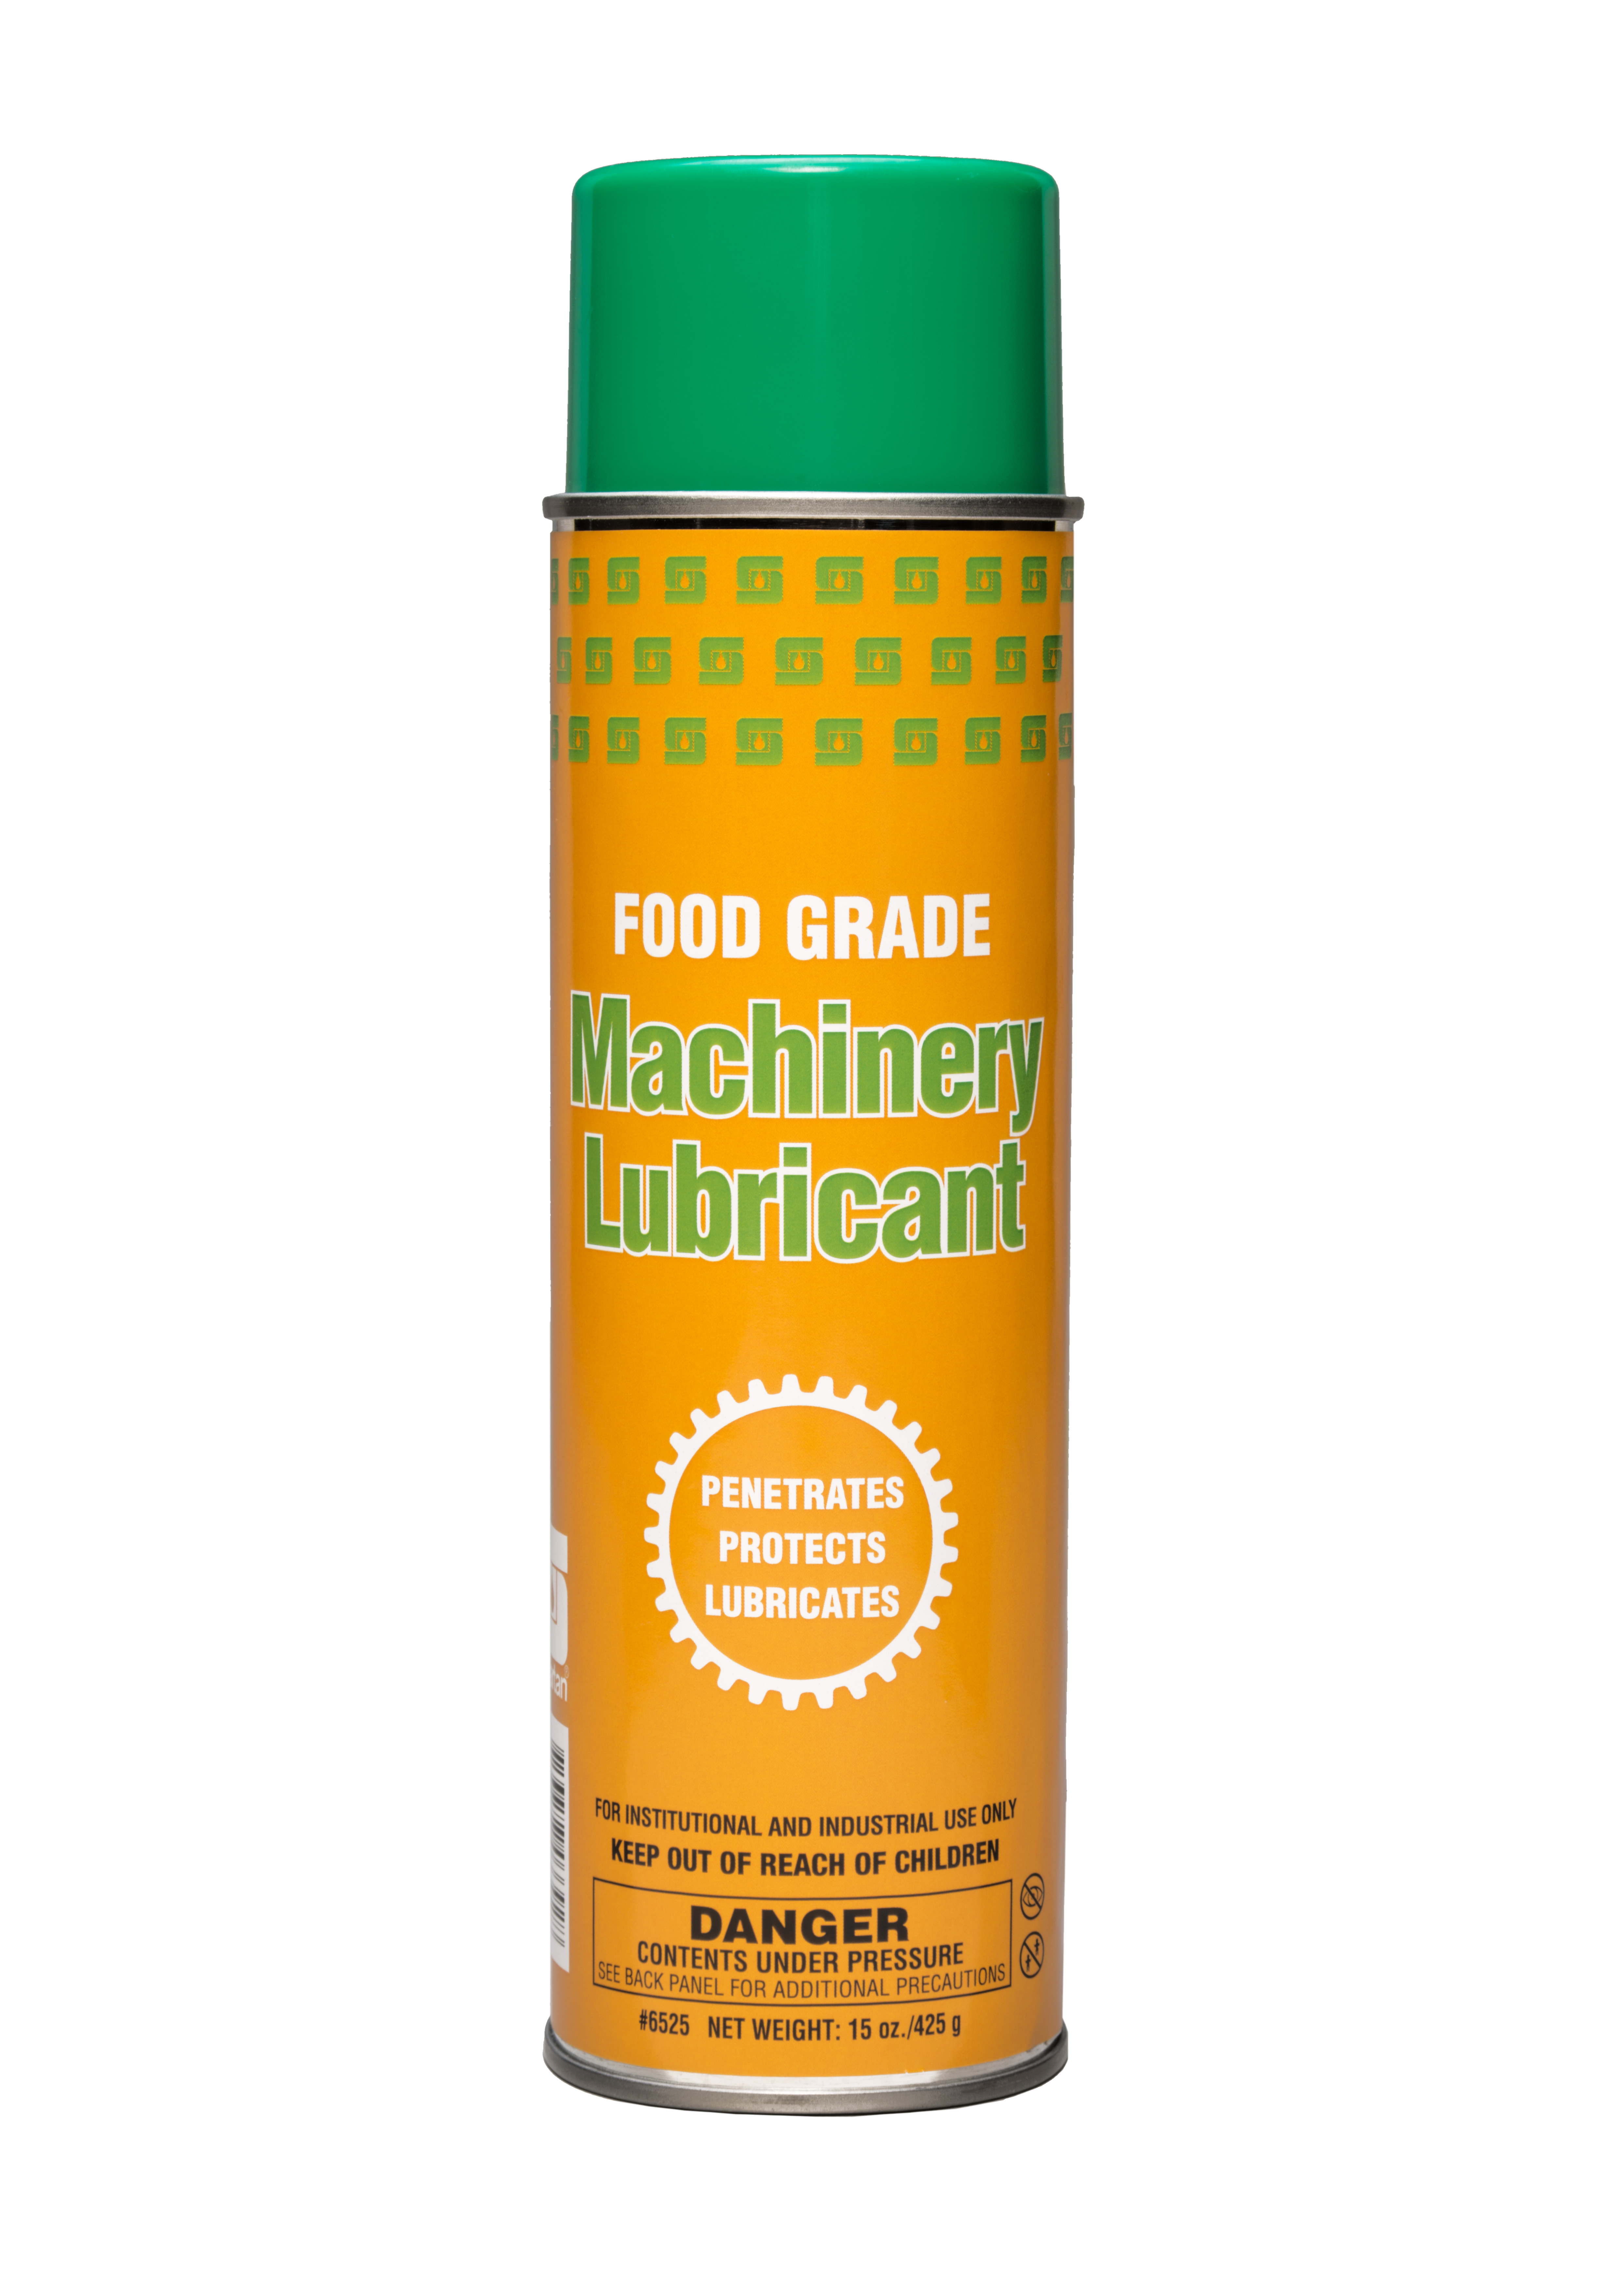 Spartan Chemical Company Food Grade Machinery Lubricant, 12-20 OZ.CAN